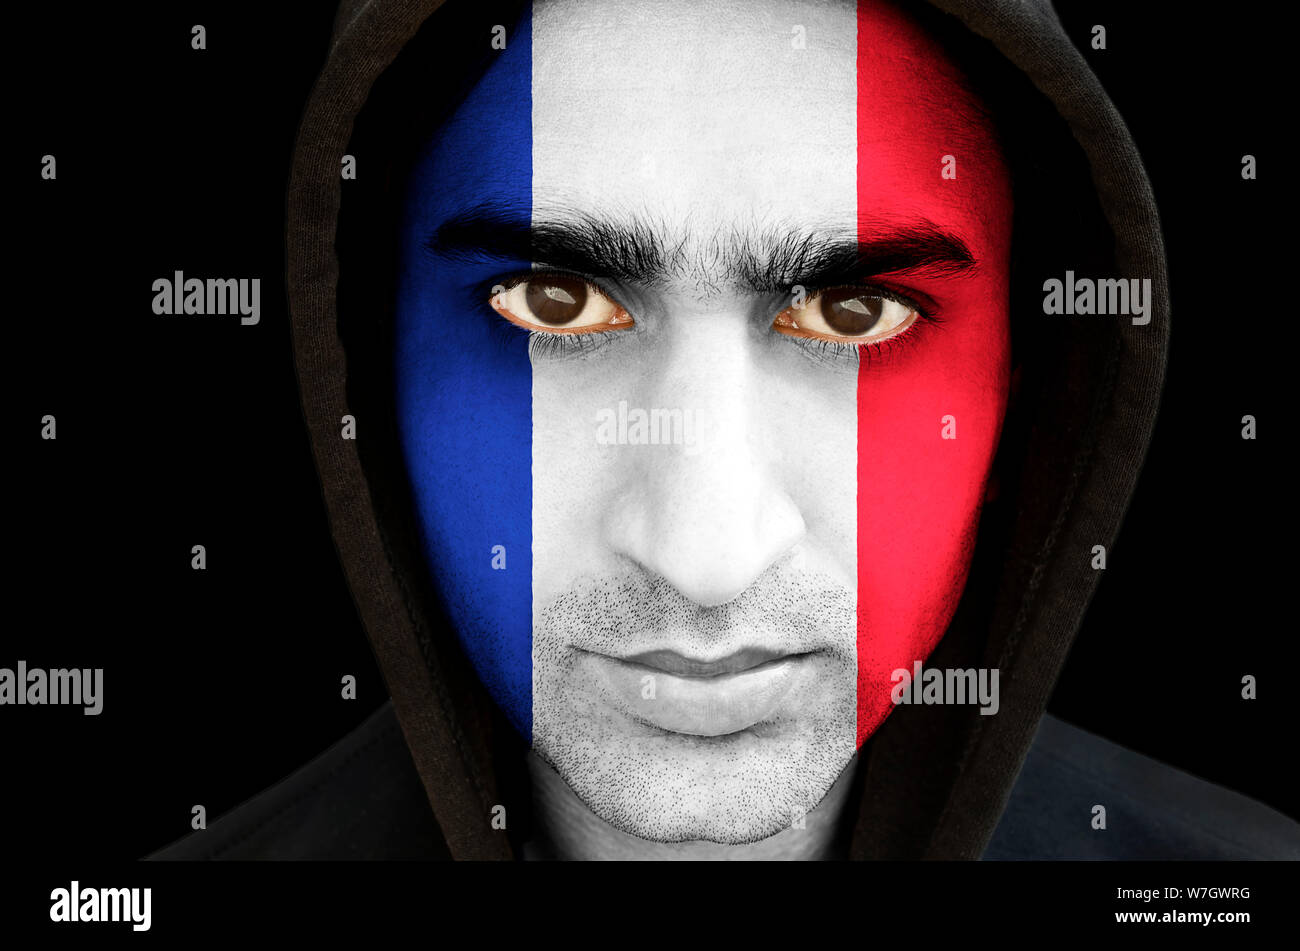 Portrait of a man with french flag face paint Stock Photo